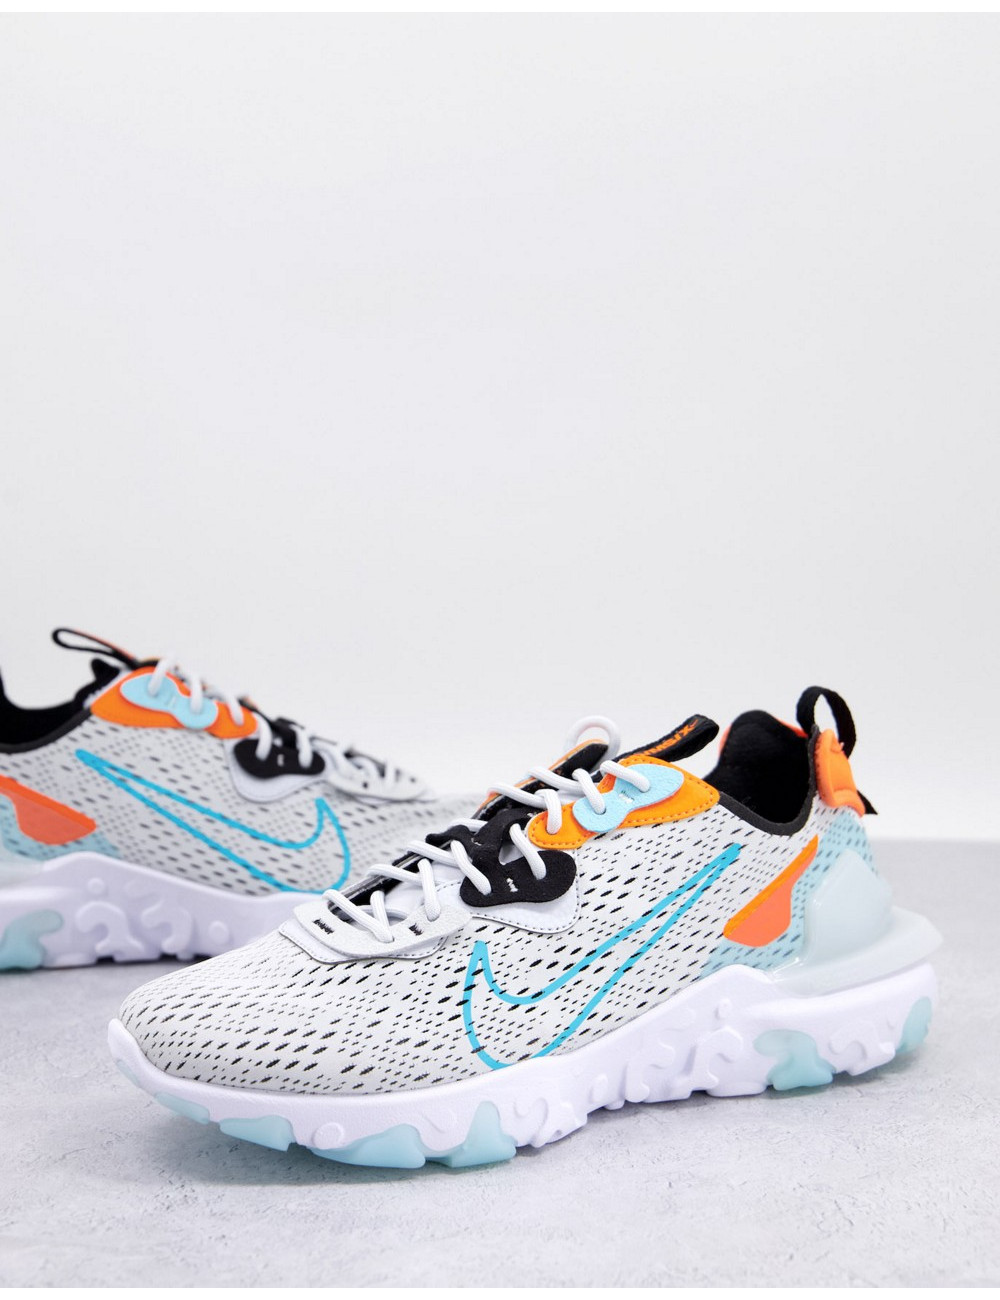 Nike React Vision trainers...